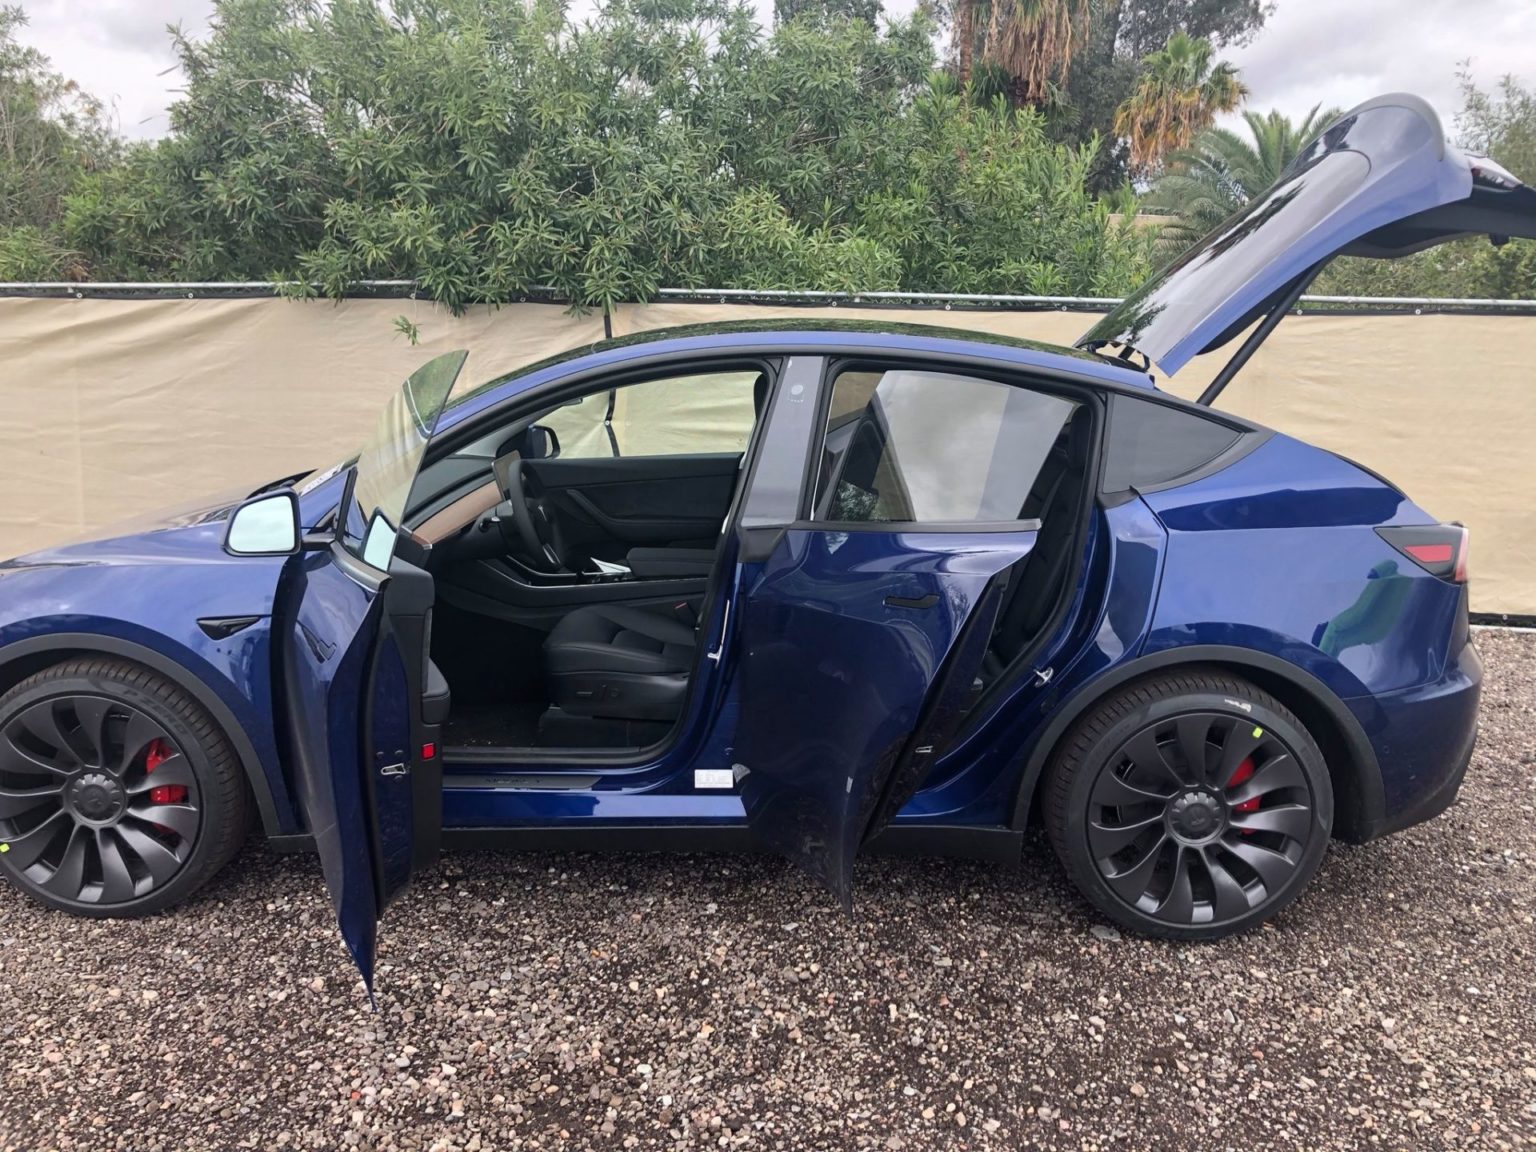 Tesla Model Y InDepth Interior Photos Revealed With Hidden Compartment